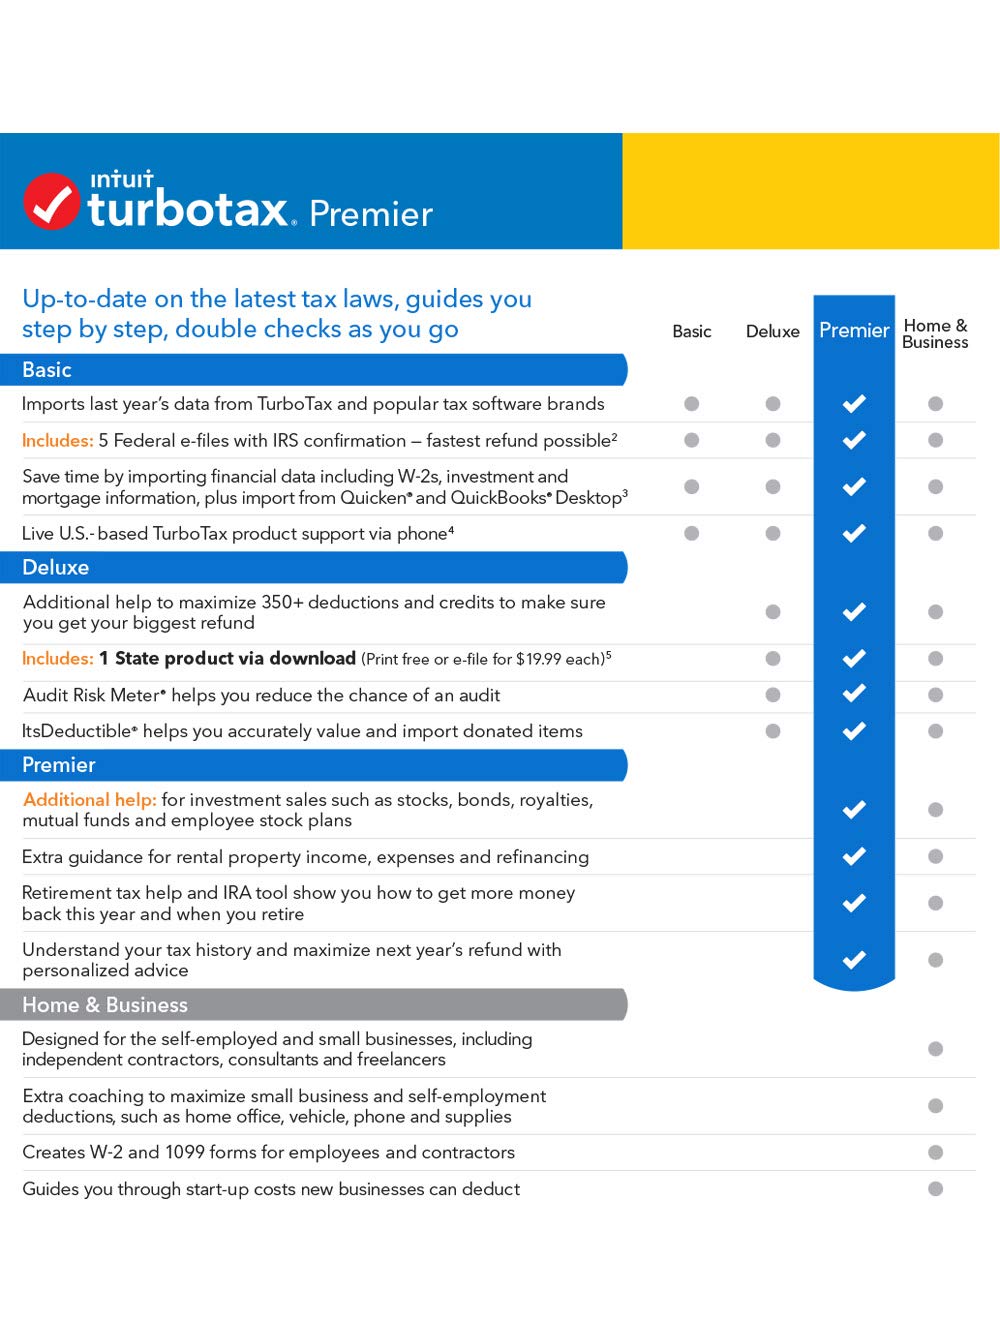 Turbotax business for mac 2019